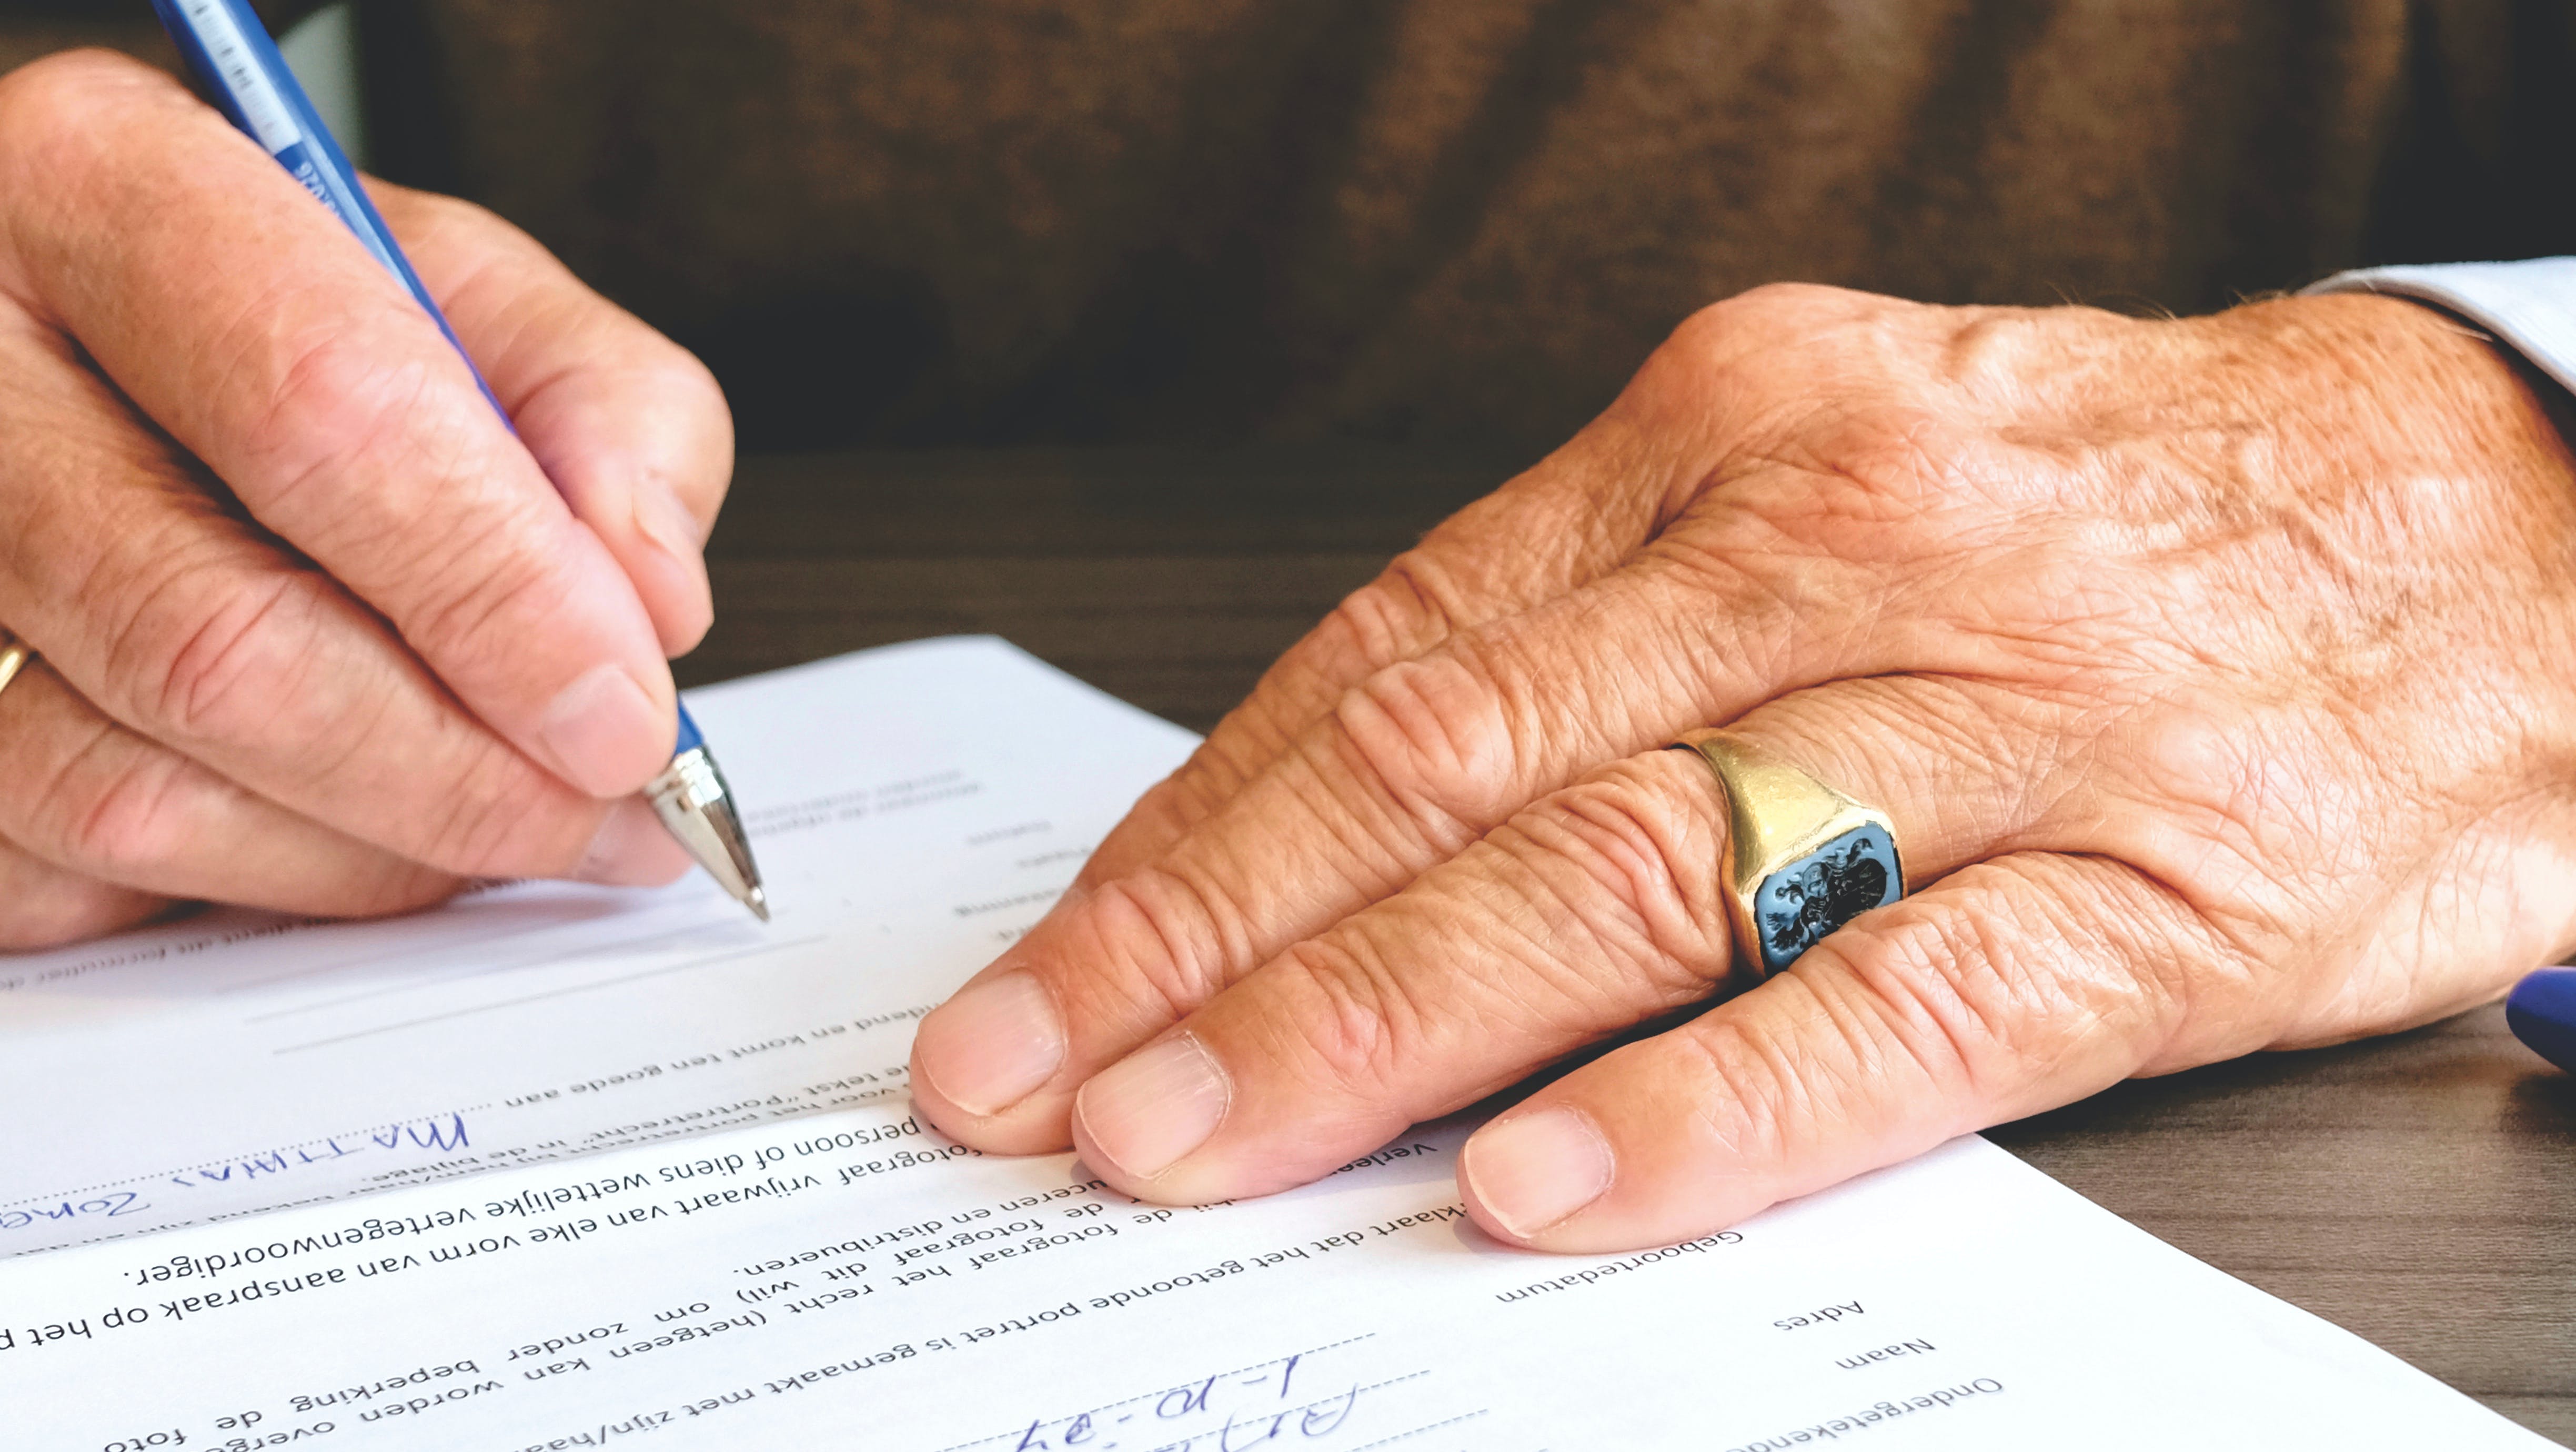 A person signing a document | Source: Pexels